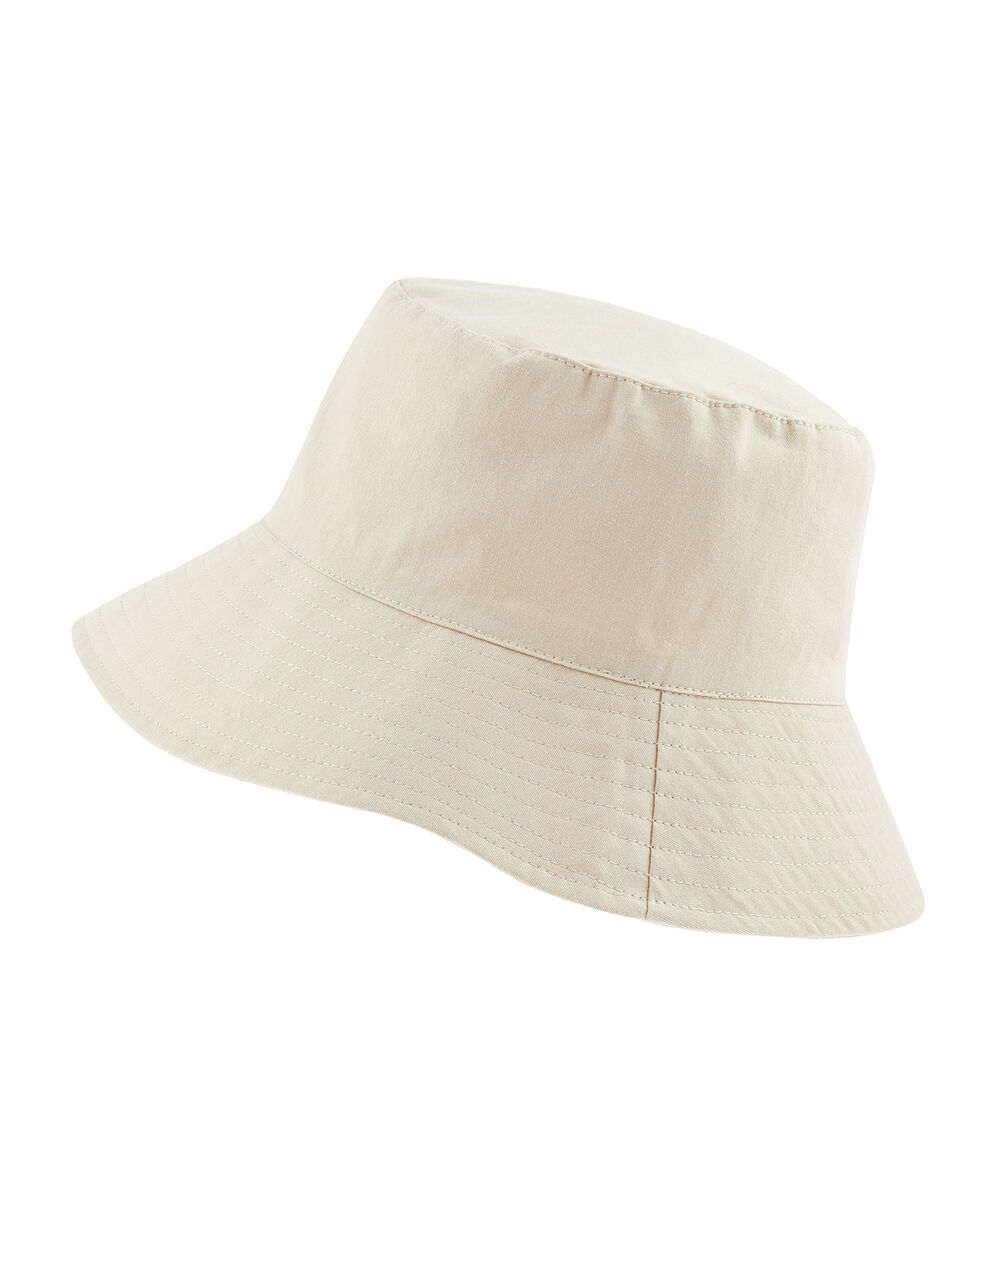 Utility Bucket Hat in Cotton Twill, Natural (NATURAL), large